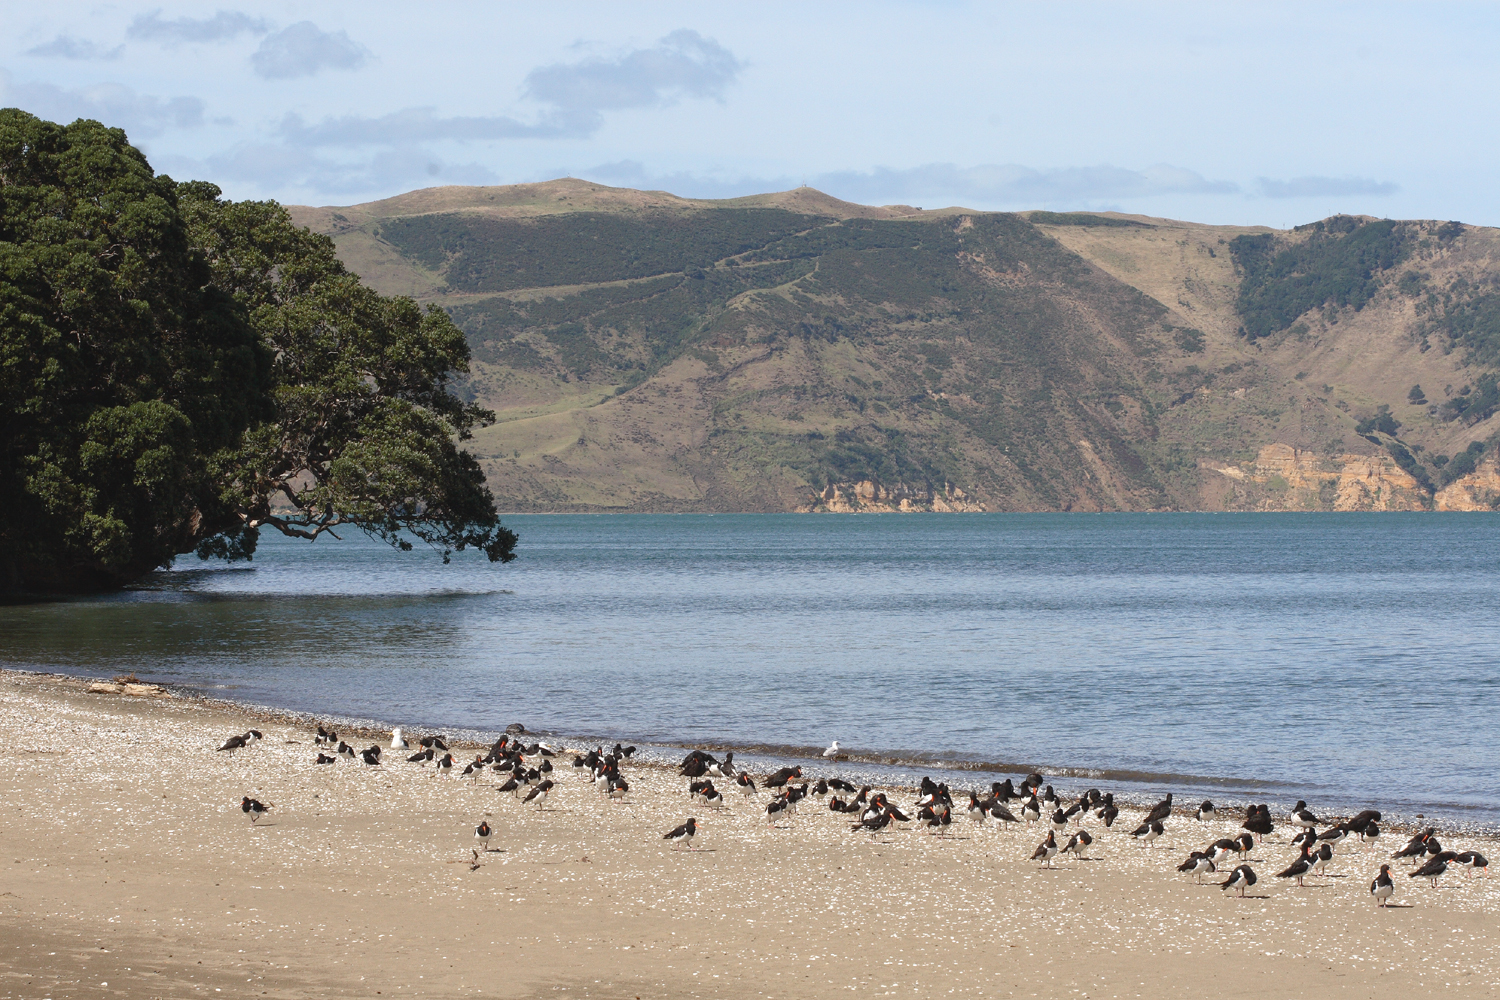 Oyster Catchers, Huia 8110